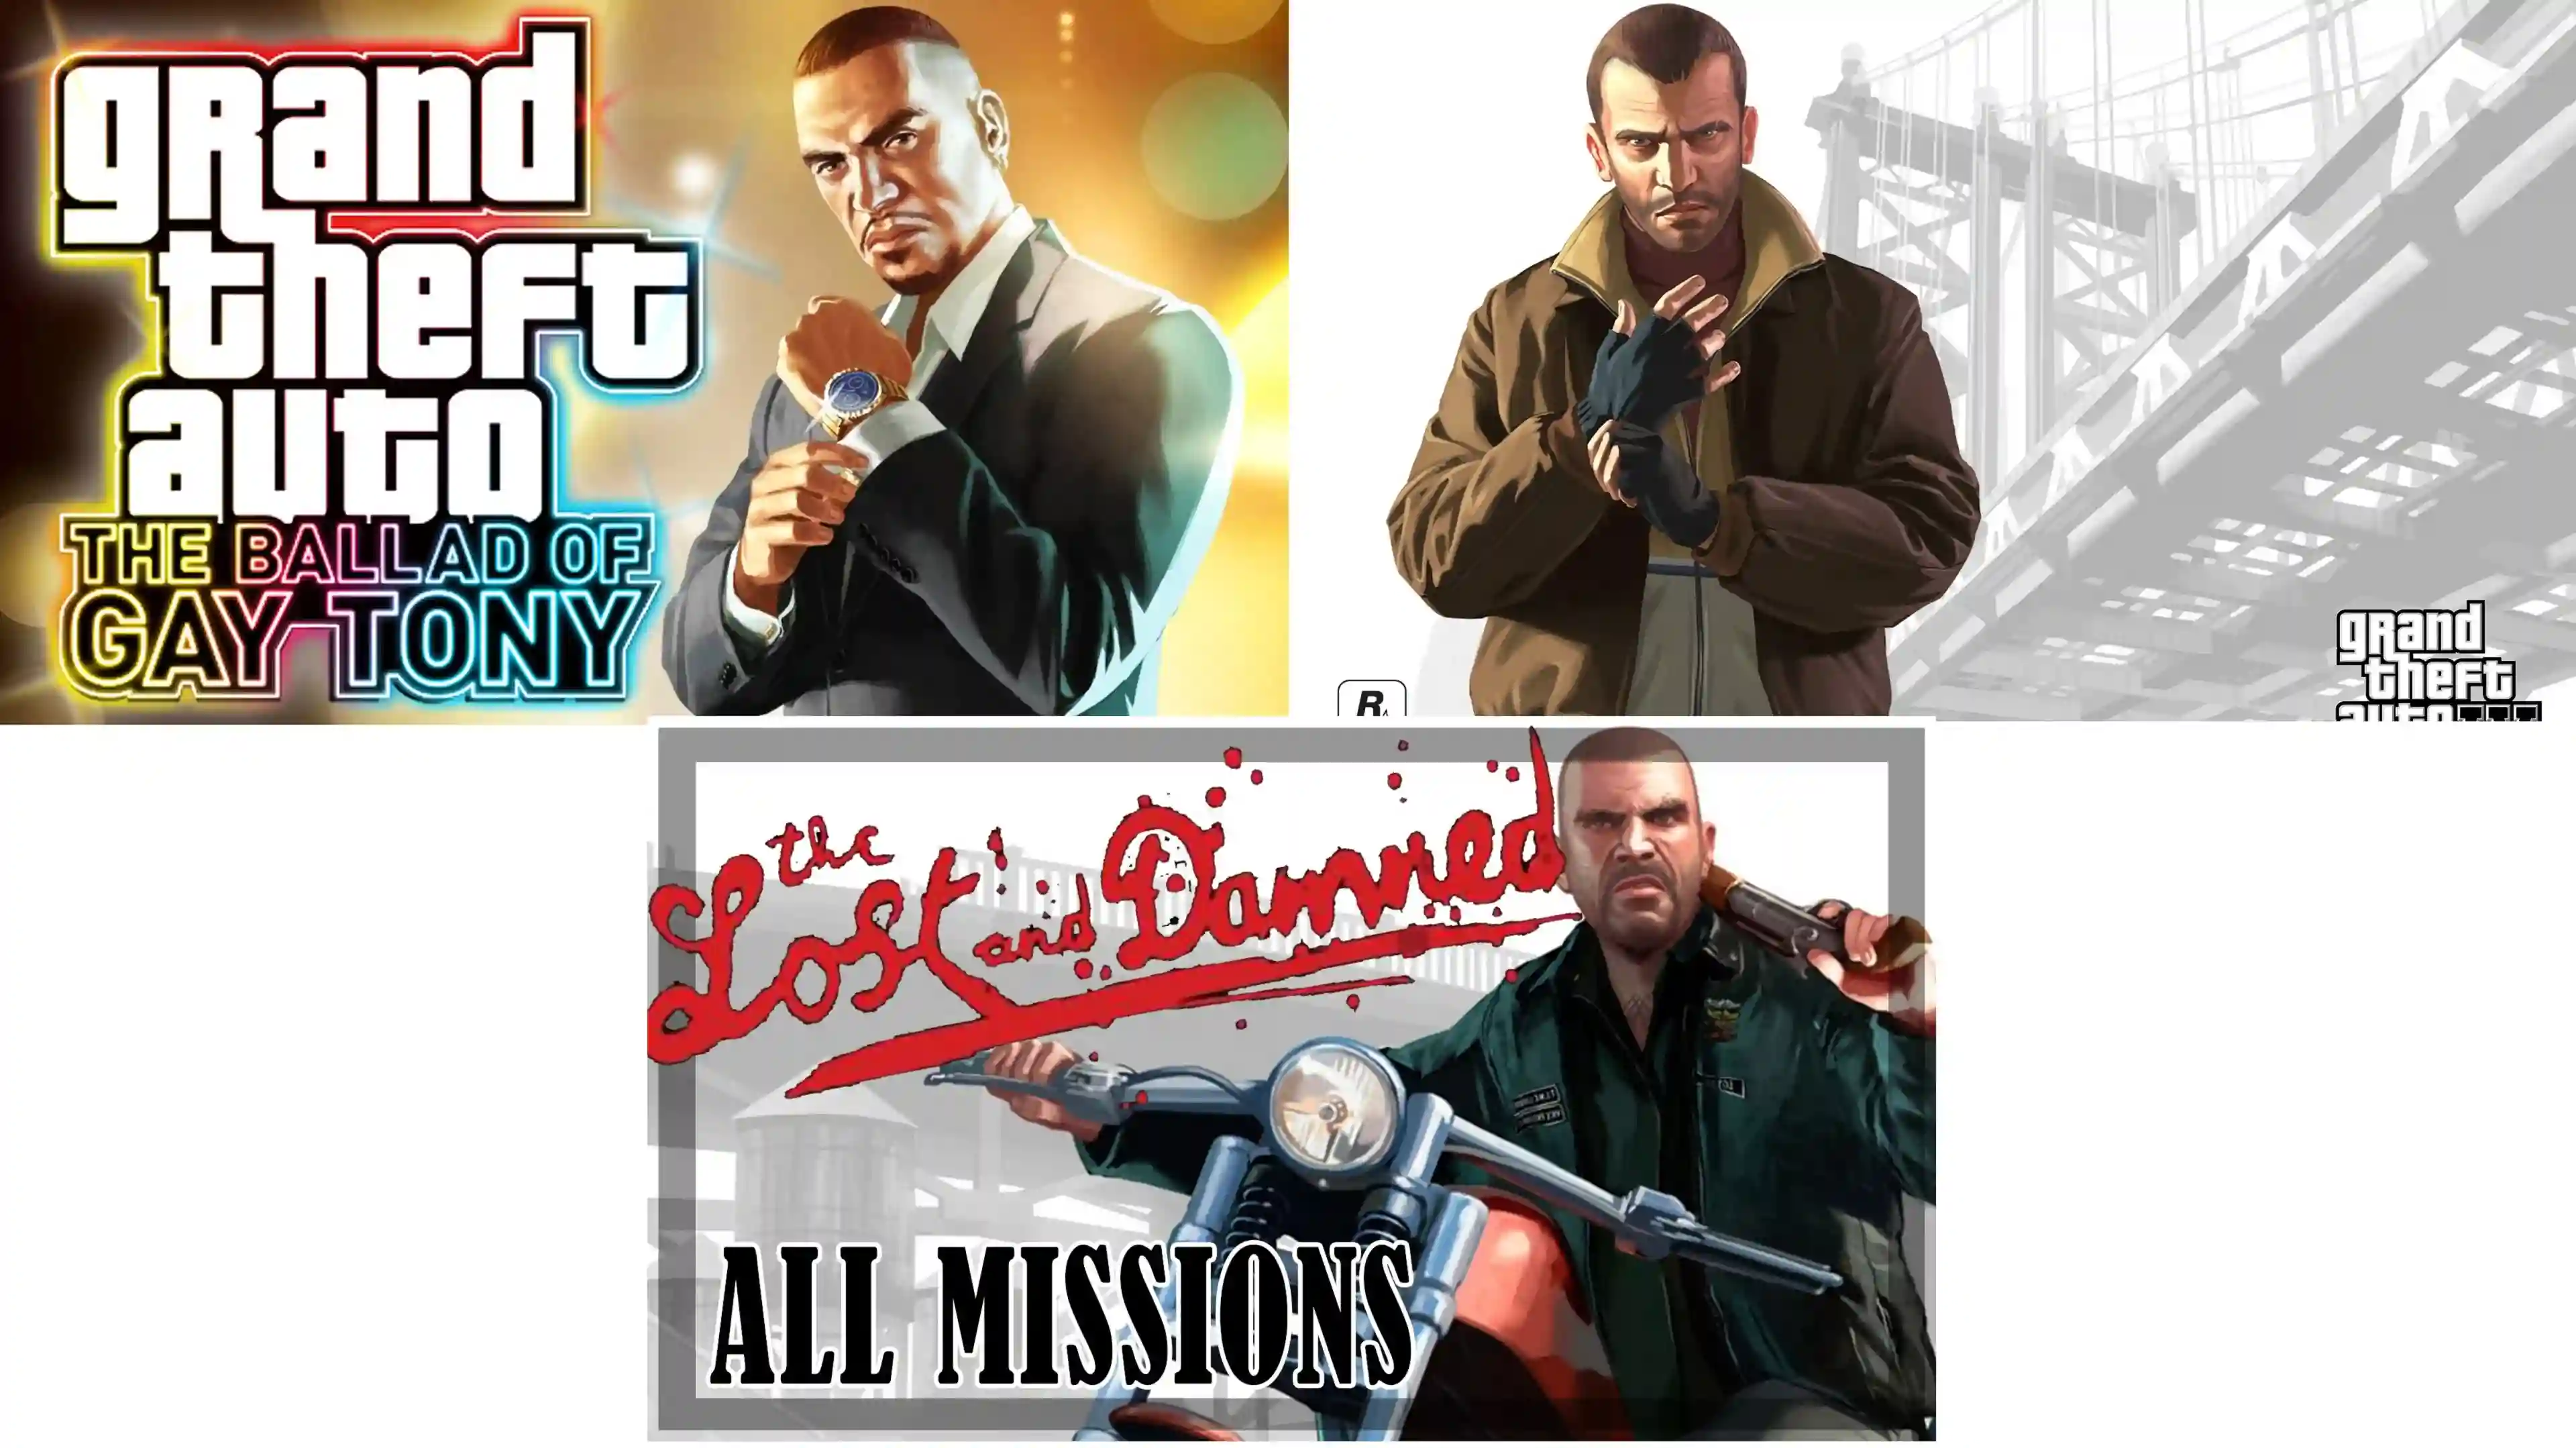 Grand Theft Auto GTA 4 with DLCs {Ballad of Gay Tony and Lost and Damned}